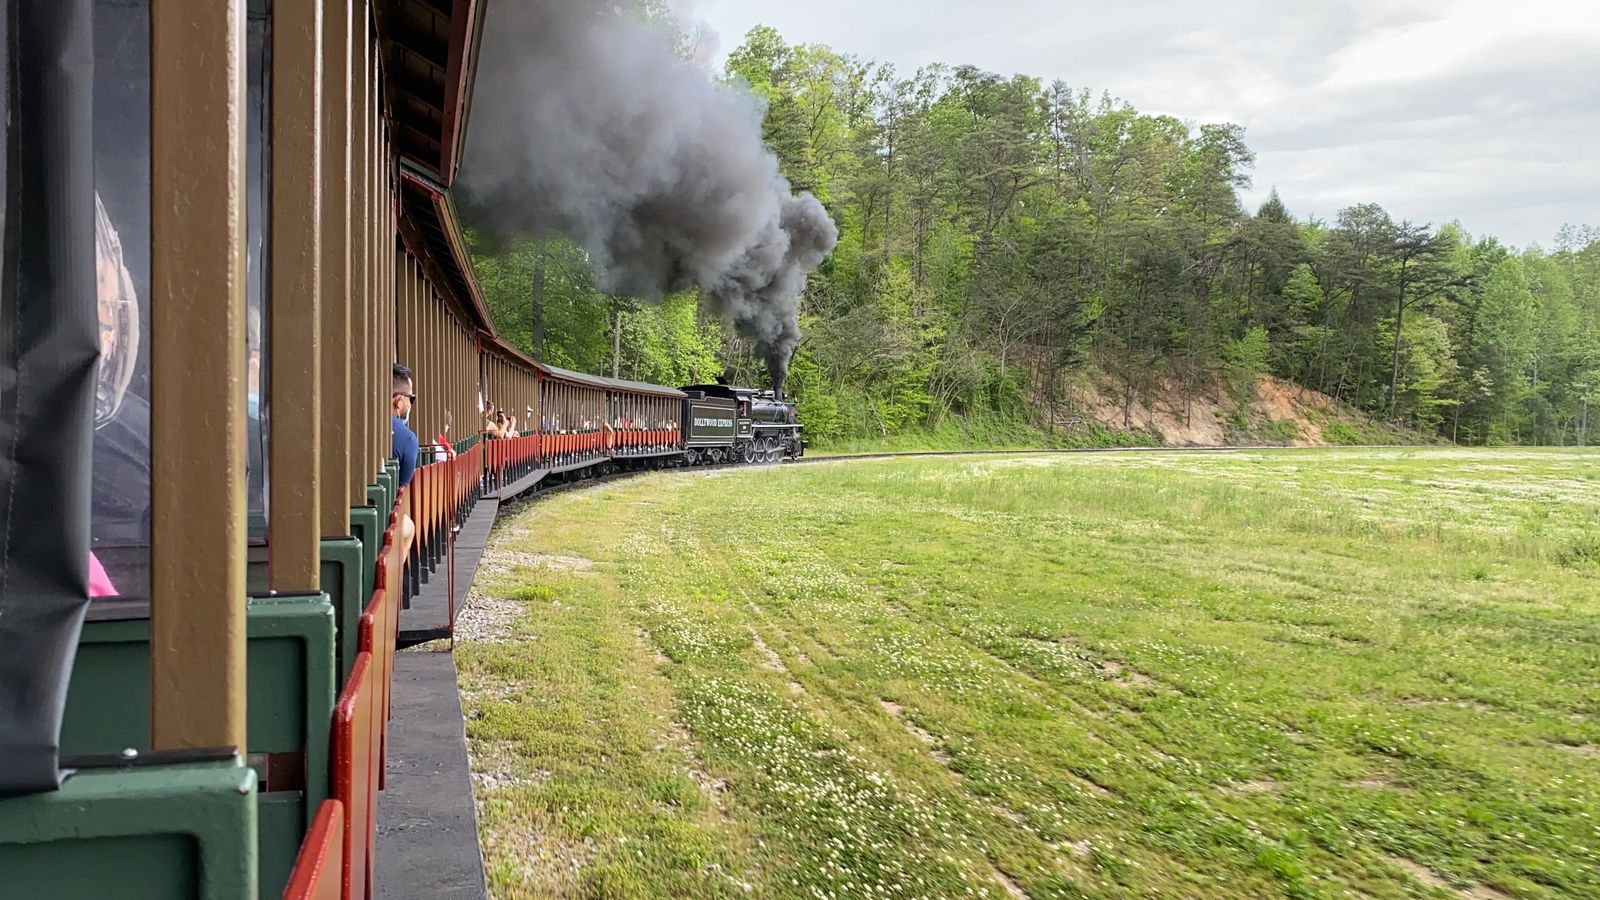 Dollywood Express and Klondike Kate along the tracks with a plum of black smoke from its engine